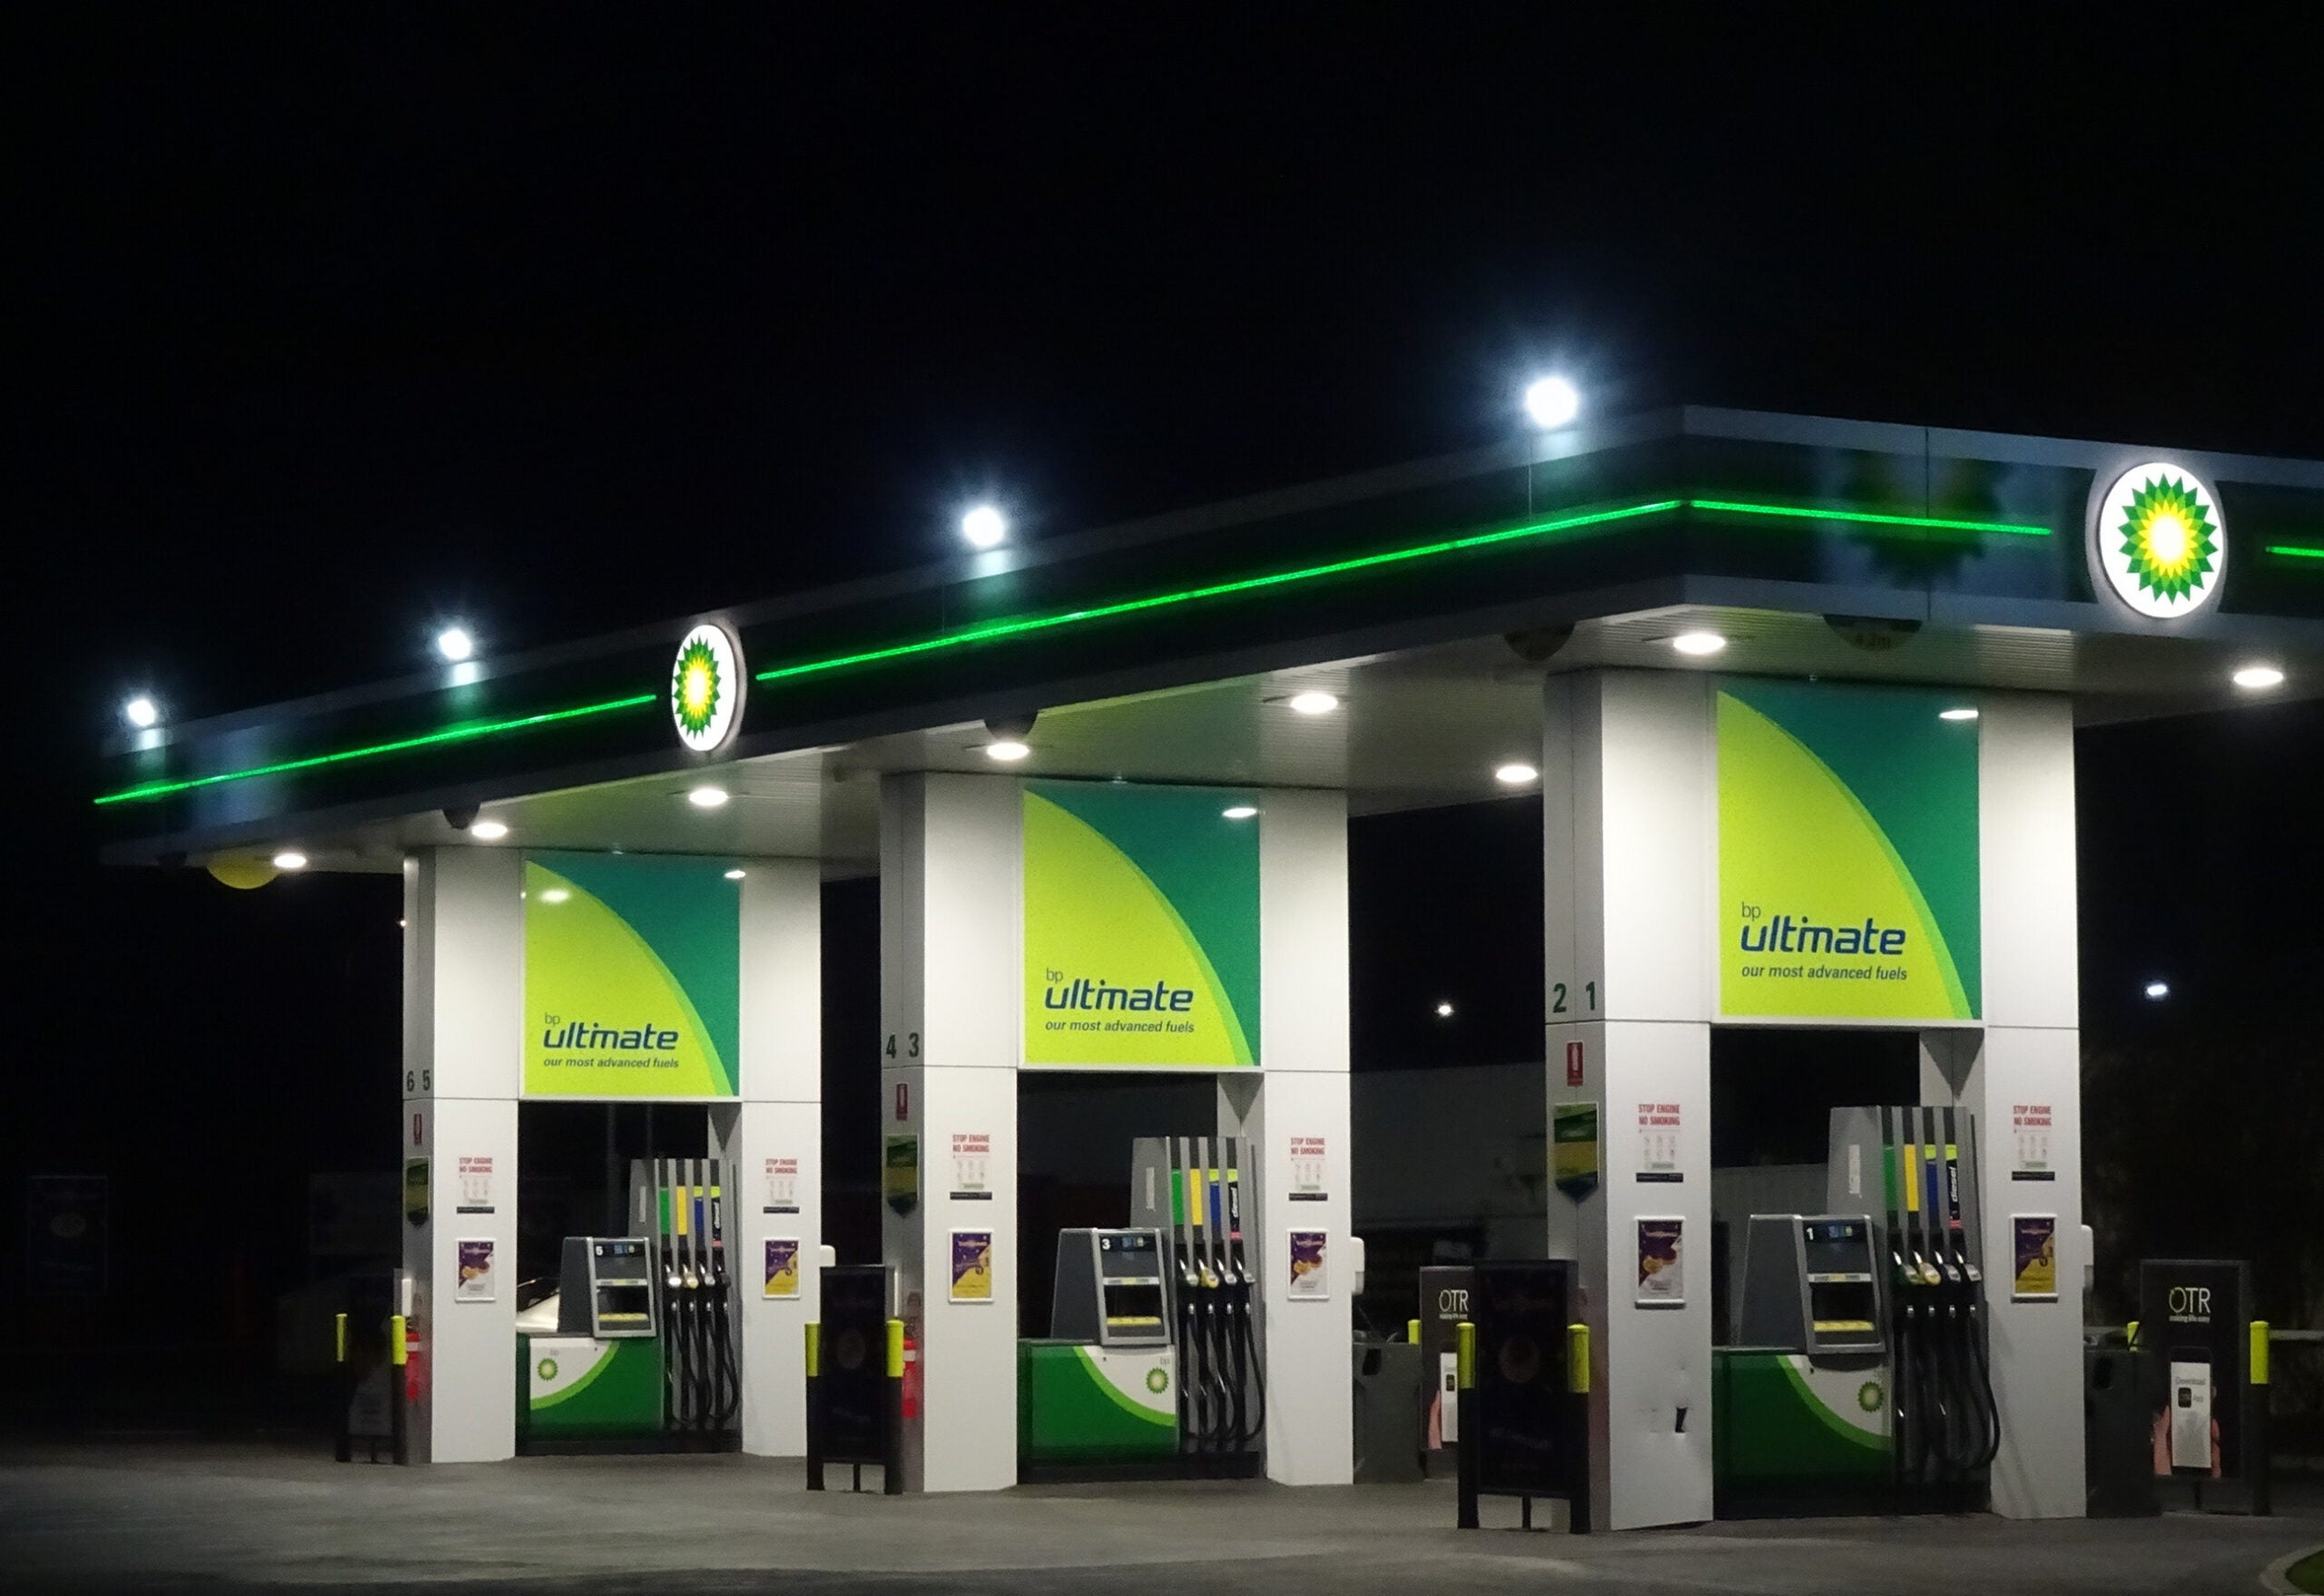 BP closes “handful” of sites due to lorry driver shortage